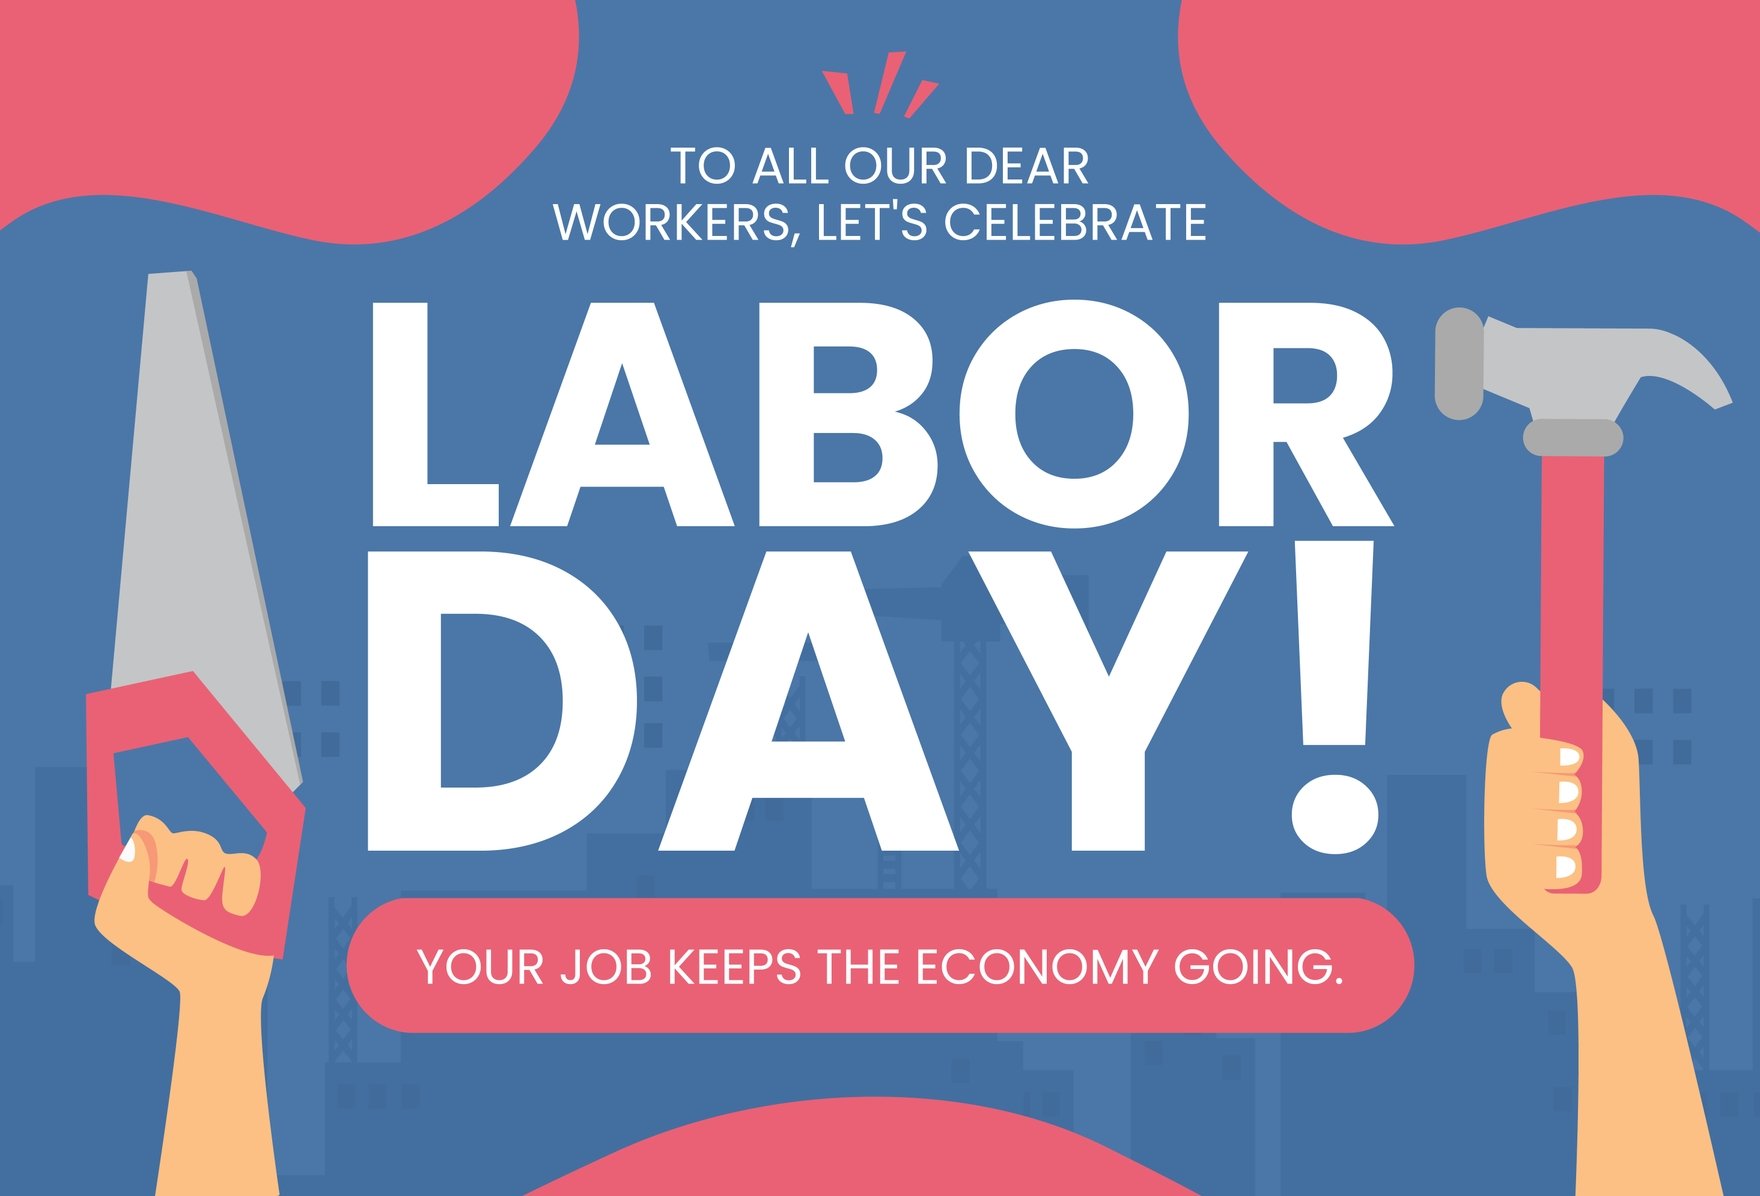 Free Labor Day Celebration Greeting Card Template in Word, Illustrator, PSD